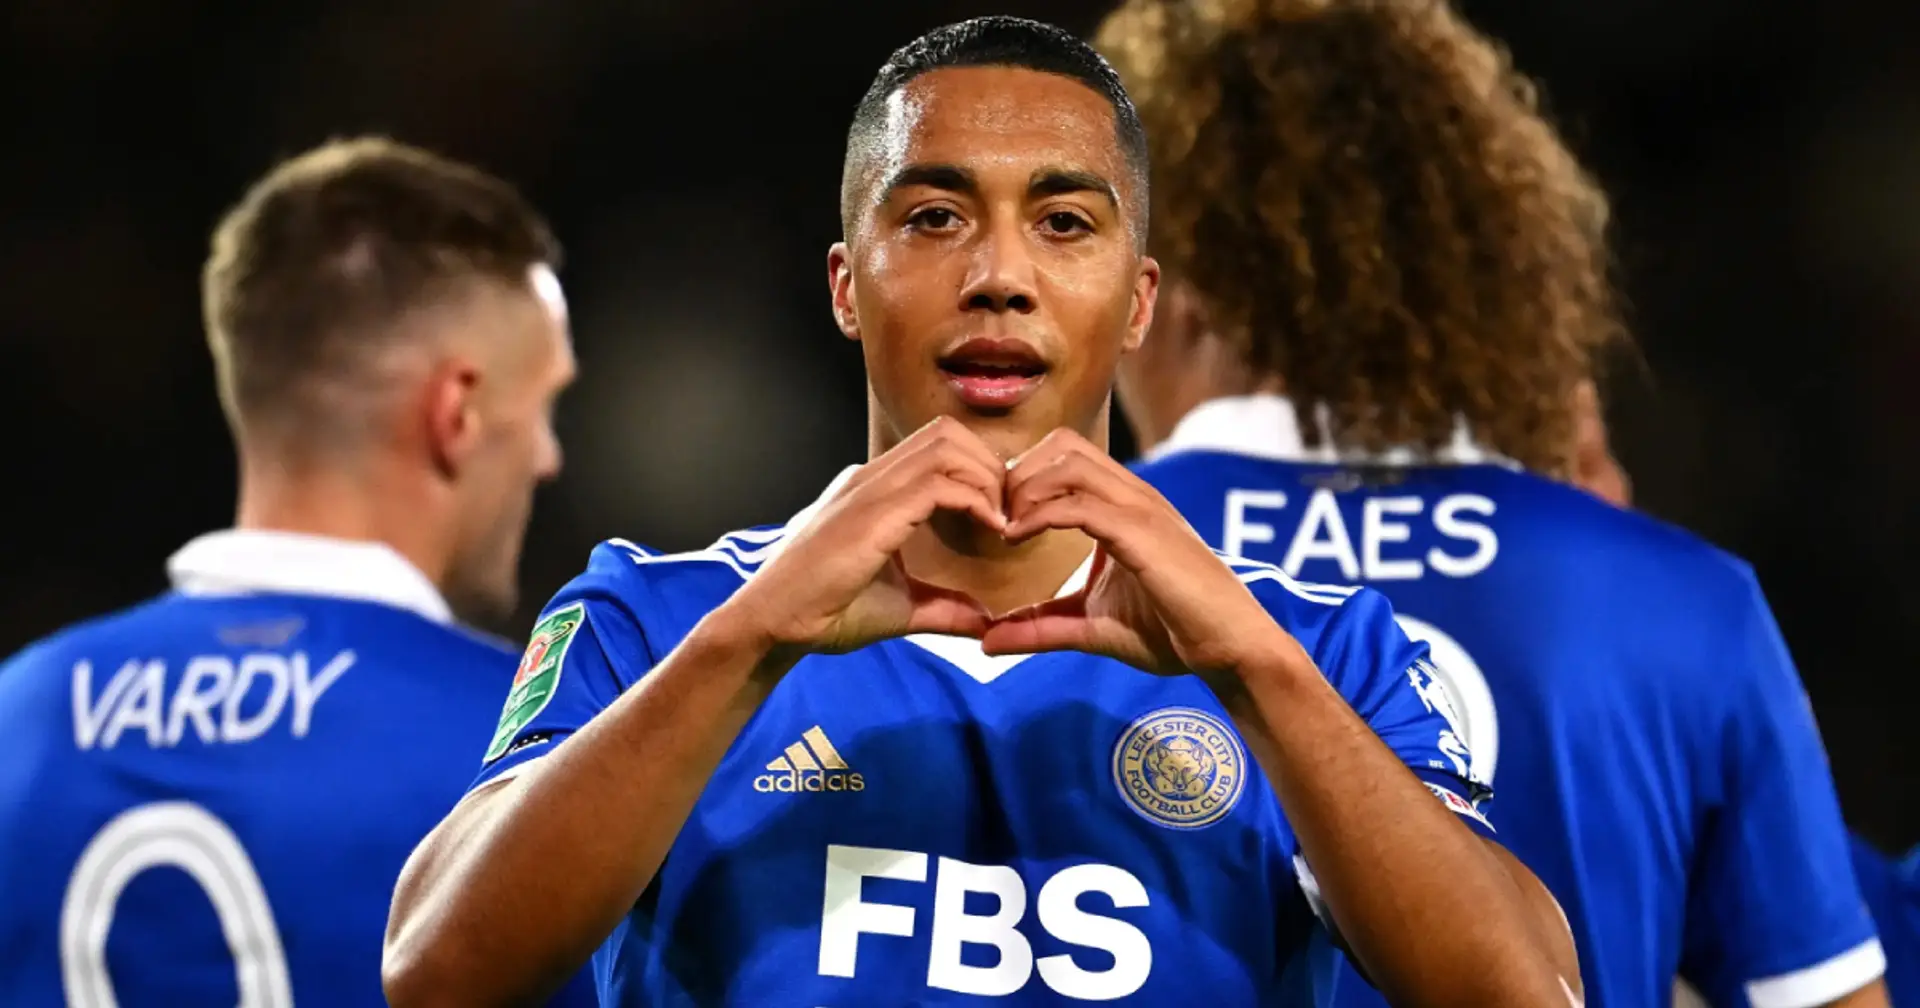 OFFICIAL: Youri Tielemans joins Aston Villa as free agent